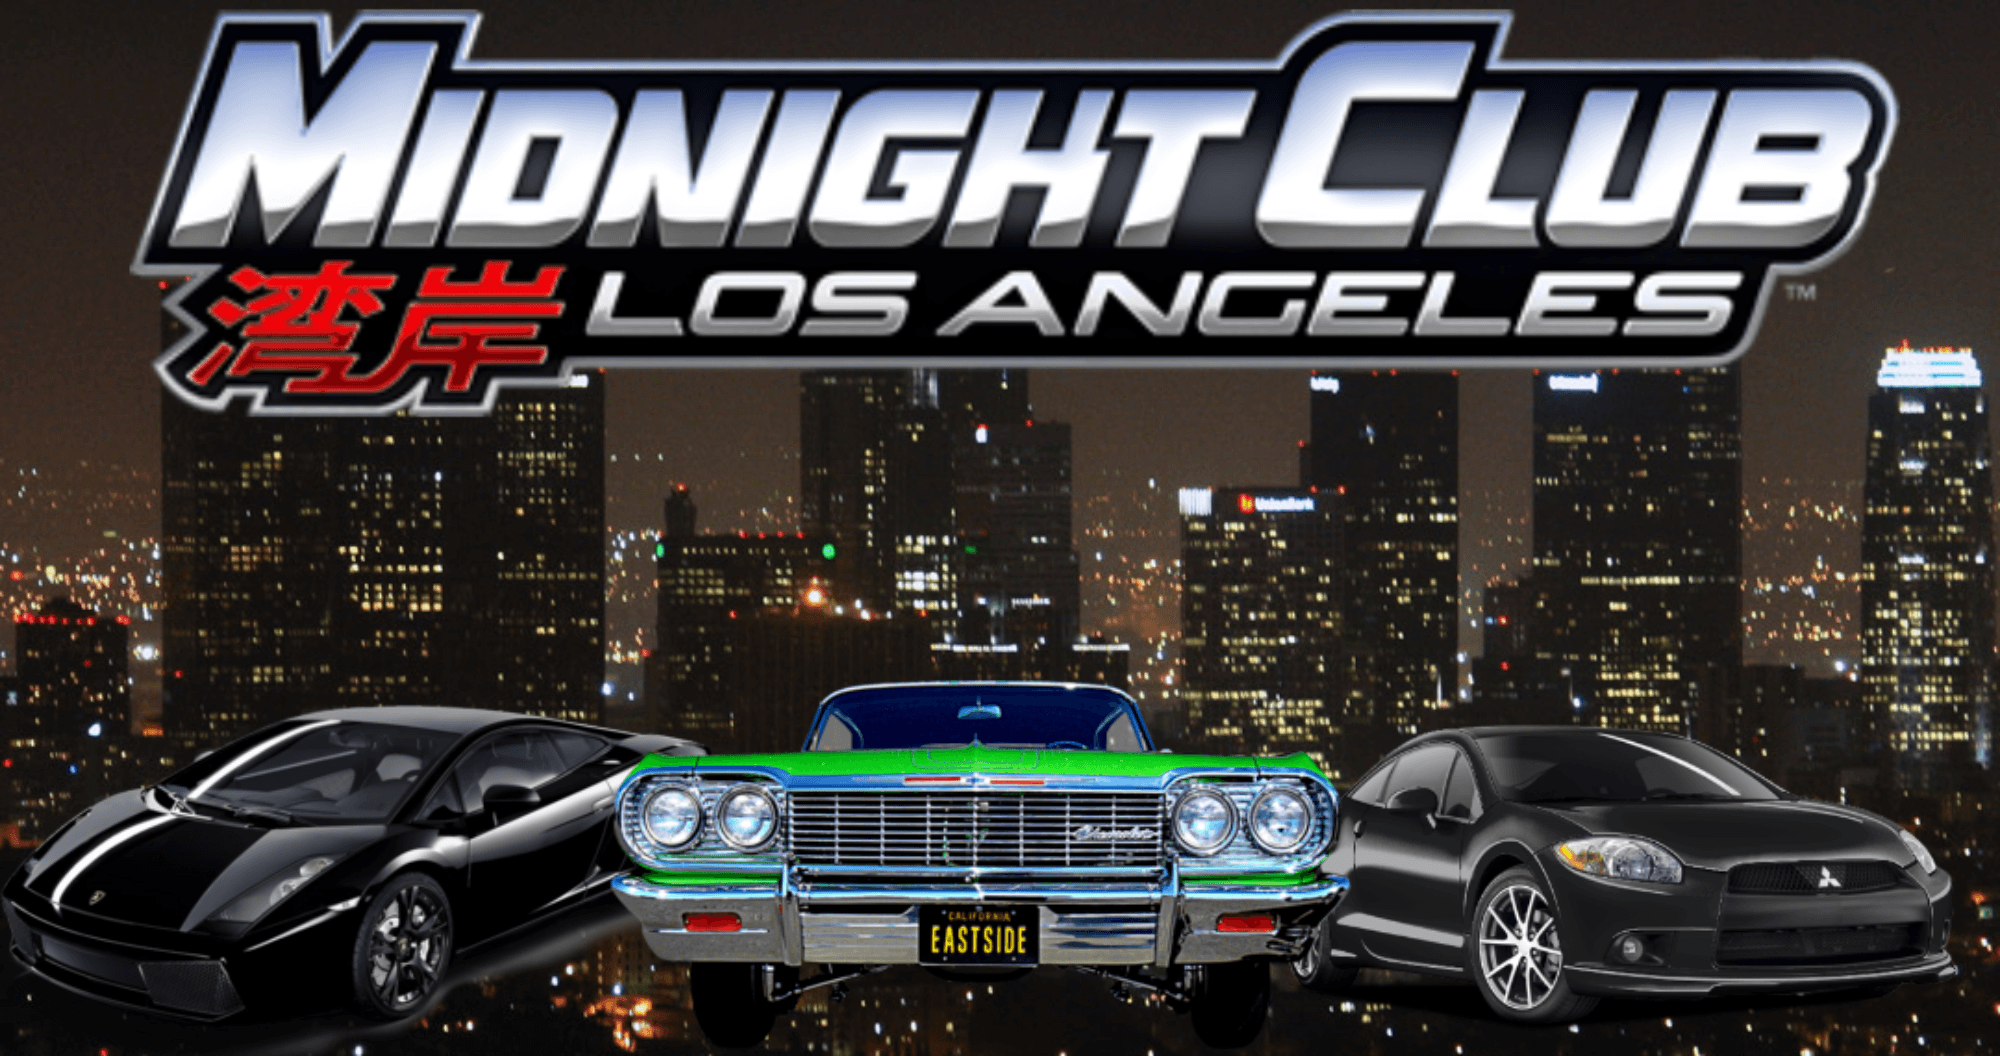 Midnight Club Wallpapers - Wallpaper Cave